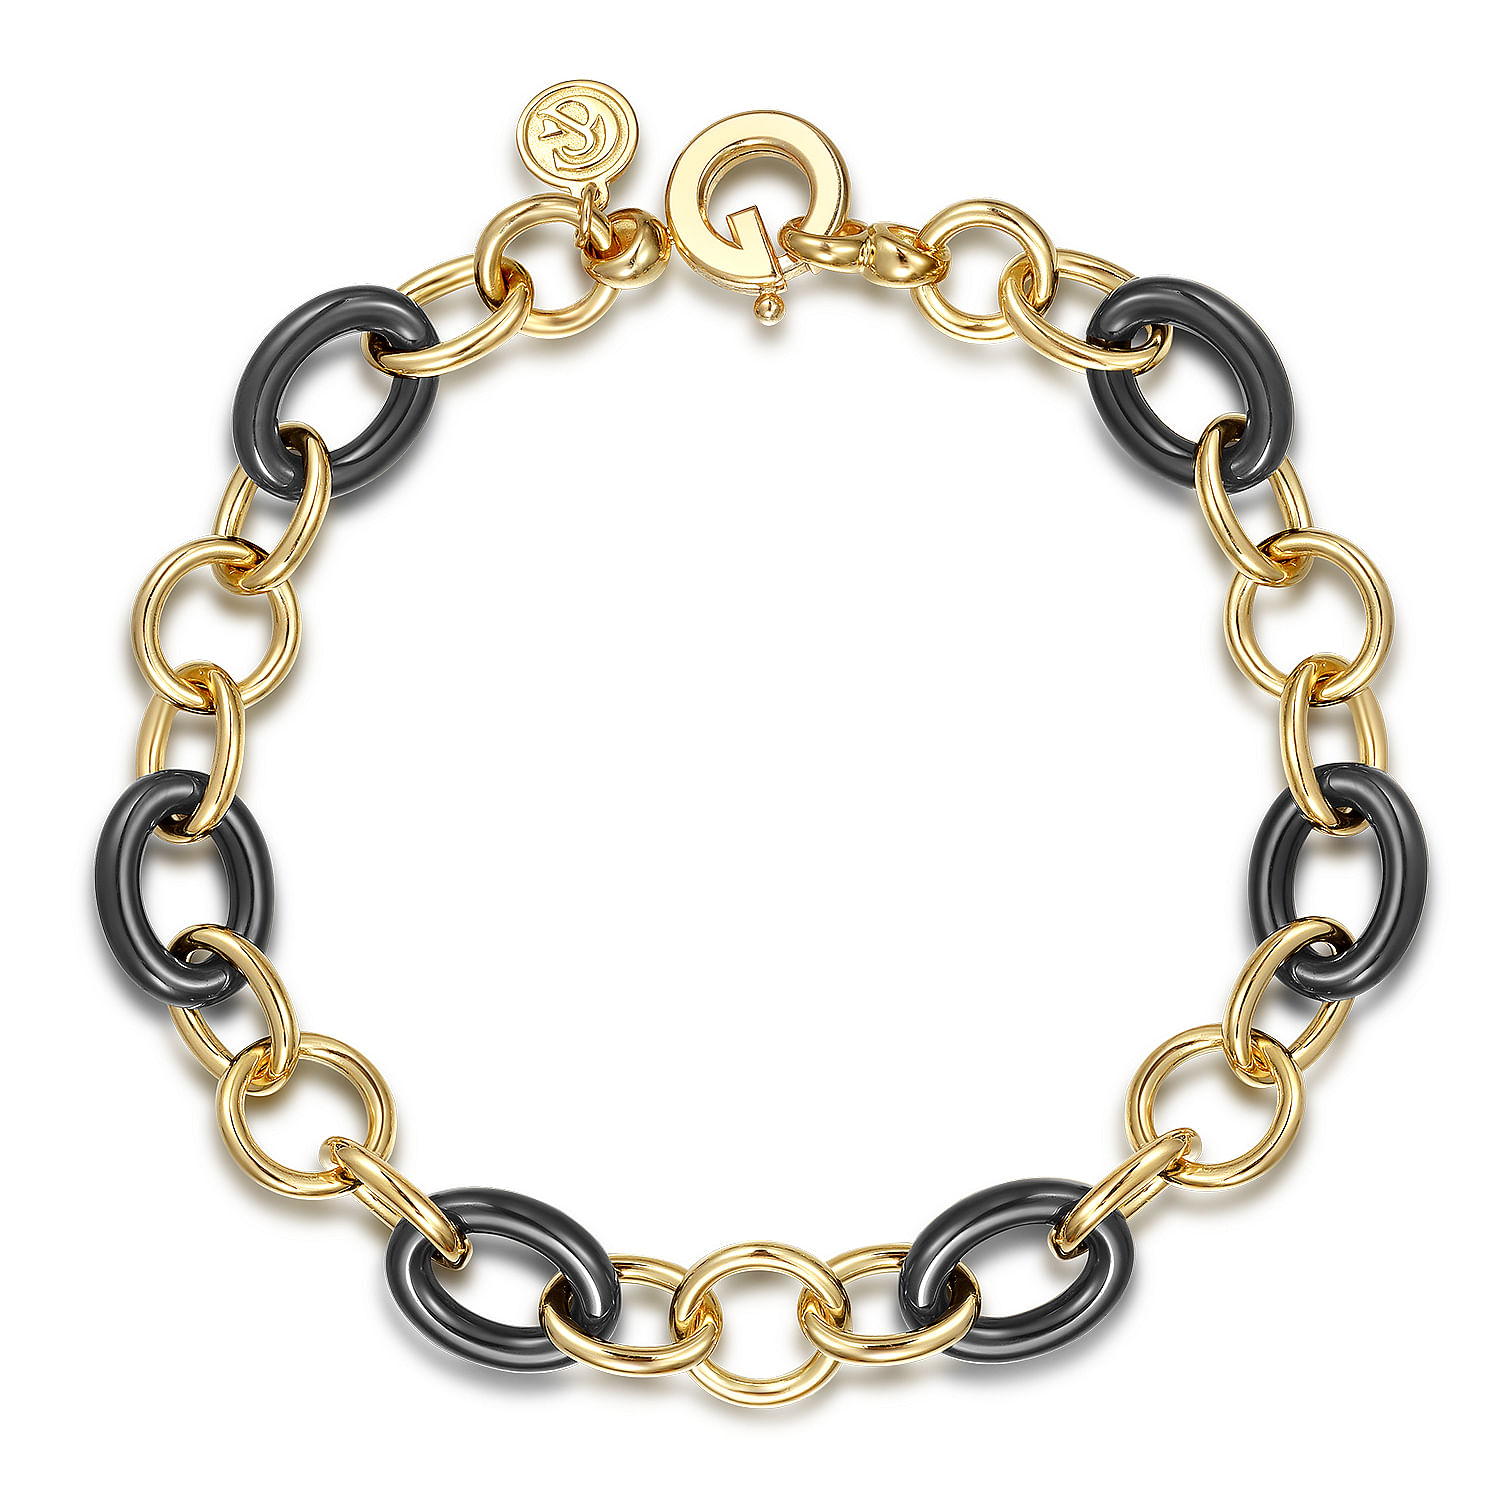 14K Yellow Gold Hollow Tube and Black Oval Ceramic Link Chain Tennis Bracelet